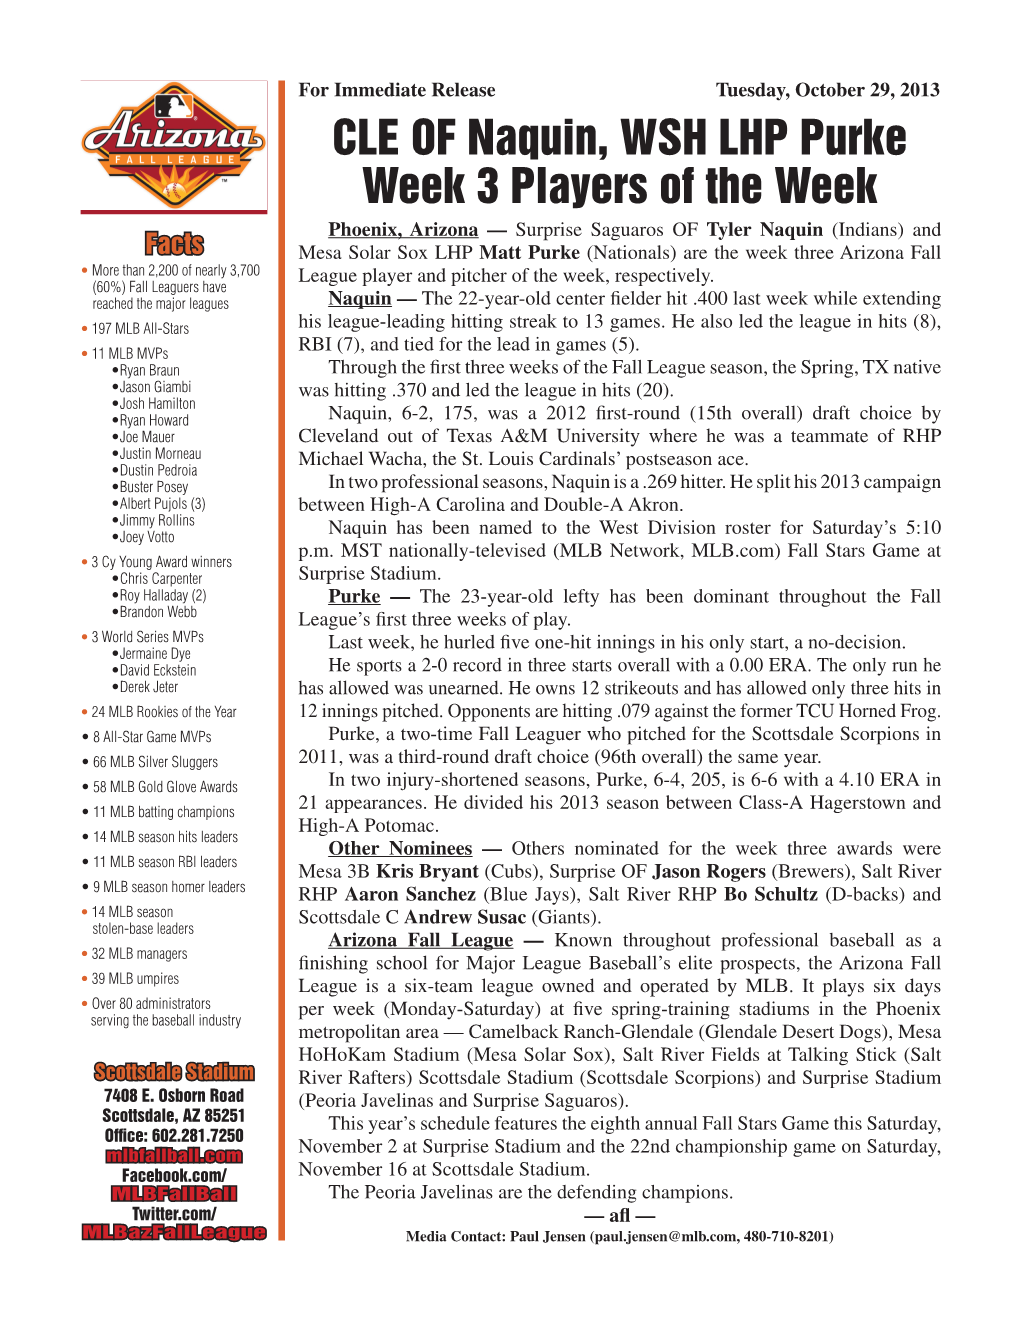 CLE of Naquin, WSH LHP Purke Week 3 Players of the Week